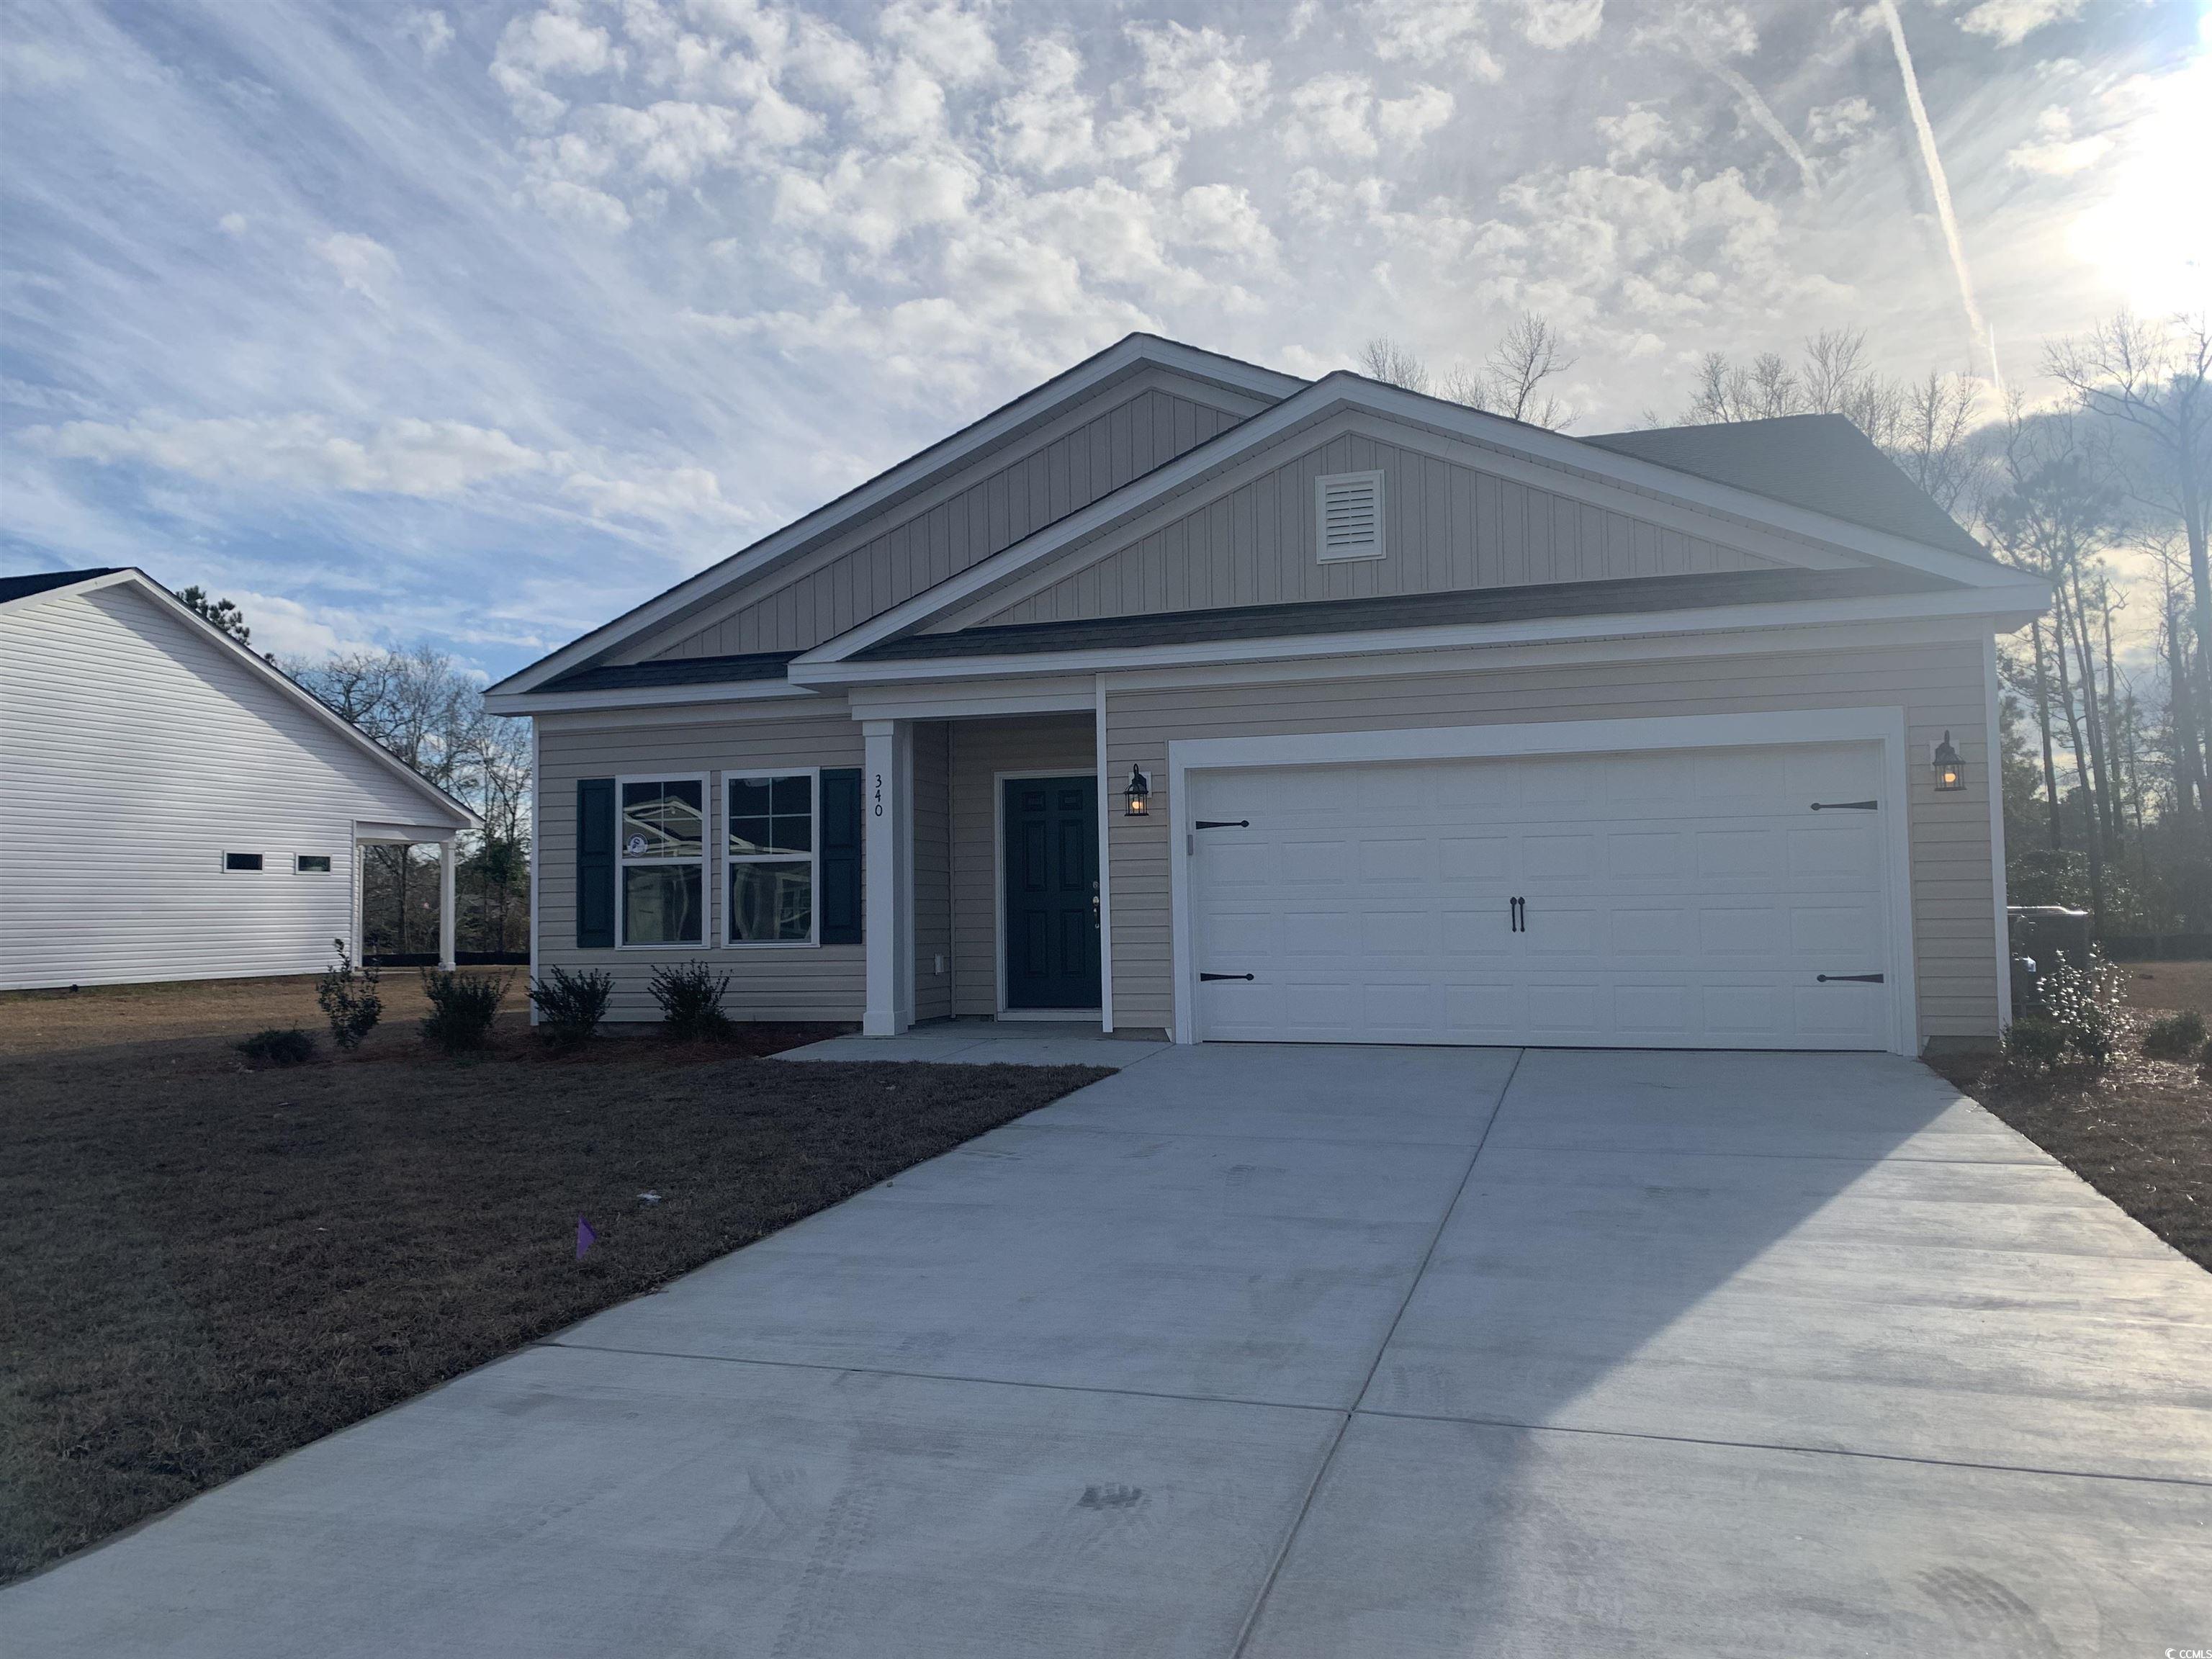 this new home is ready to move in!! located in great southern homes newest community beach gardens in conway, sc! standard features included are full irrigation, garage keypad & two car fobs, granite counters, framed mirror over bathroom vanites, gas tankless water heater, 14 seer gas hvac, 9ft ceilings, thermal envelope air sealing, r50 air blown attic insulation just to name a few! this great, new community features oversized homesites, affordable pricing plus modern plans that feature larger kitchens and entertaining areas as well as outdoor living spaces. once you tour great southern homes original and carefully designed, energy-efficient homes that range from 1,400 square feet to 2,300 square feet, you’ll fall in love with our homes and with beach gardens! contact on site agent for more details! pricing, features, terms & availability are subject to change prior to the sale without notice or obligation.